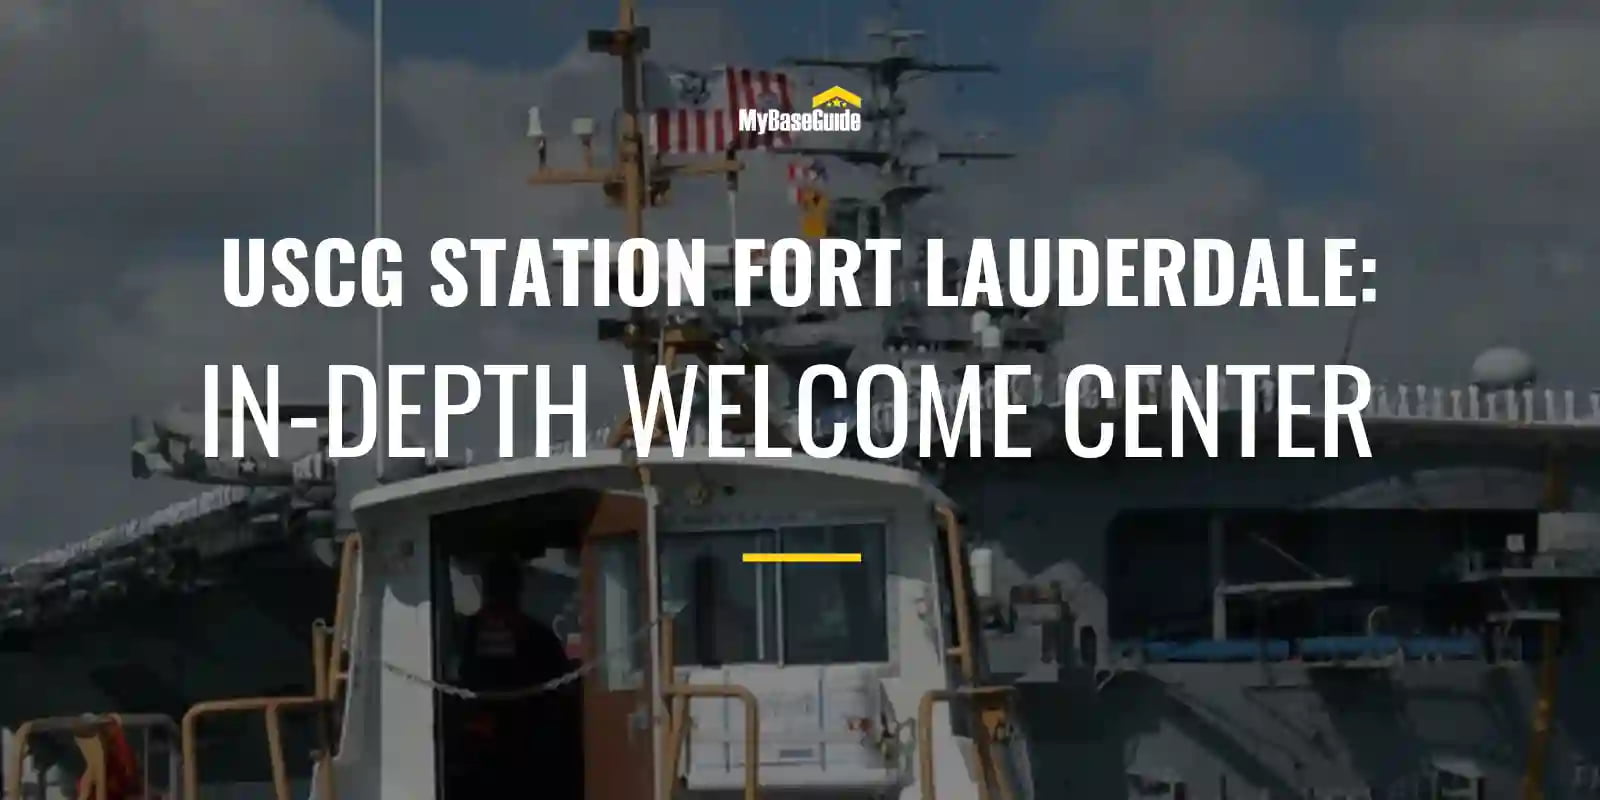 USCG Station Fort Lauderdale: In-Depth Welcome Center